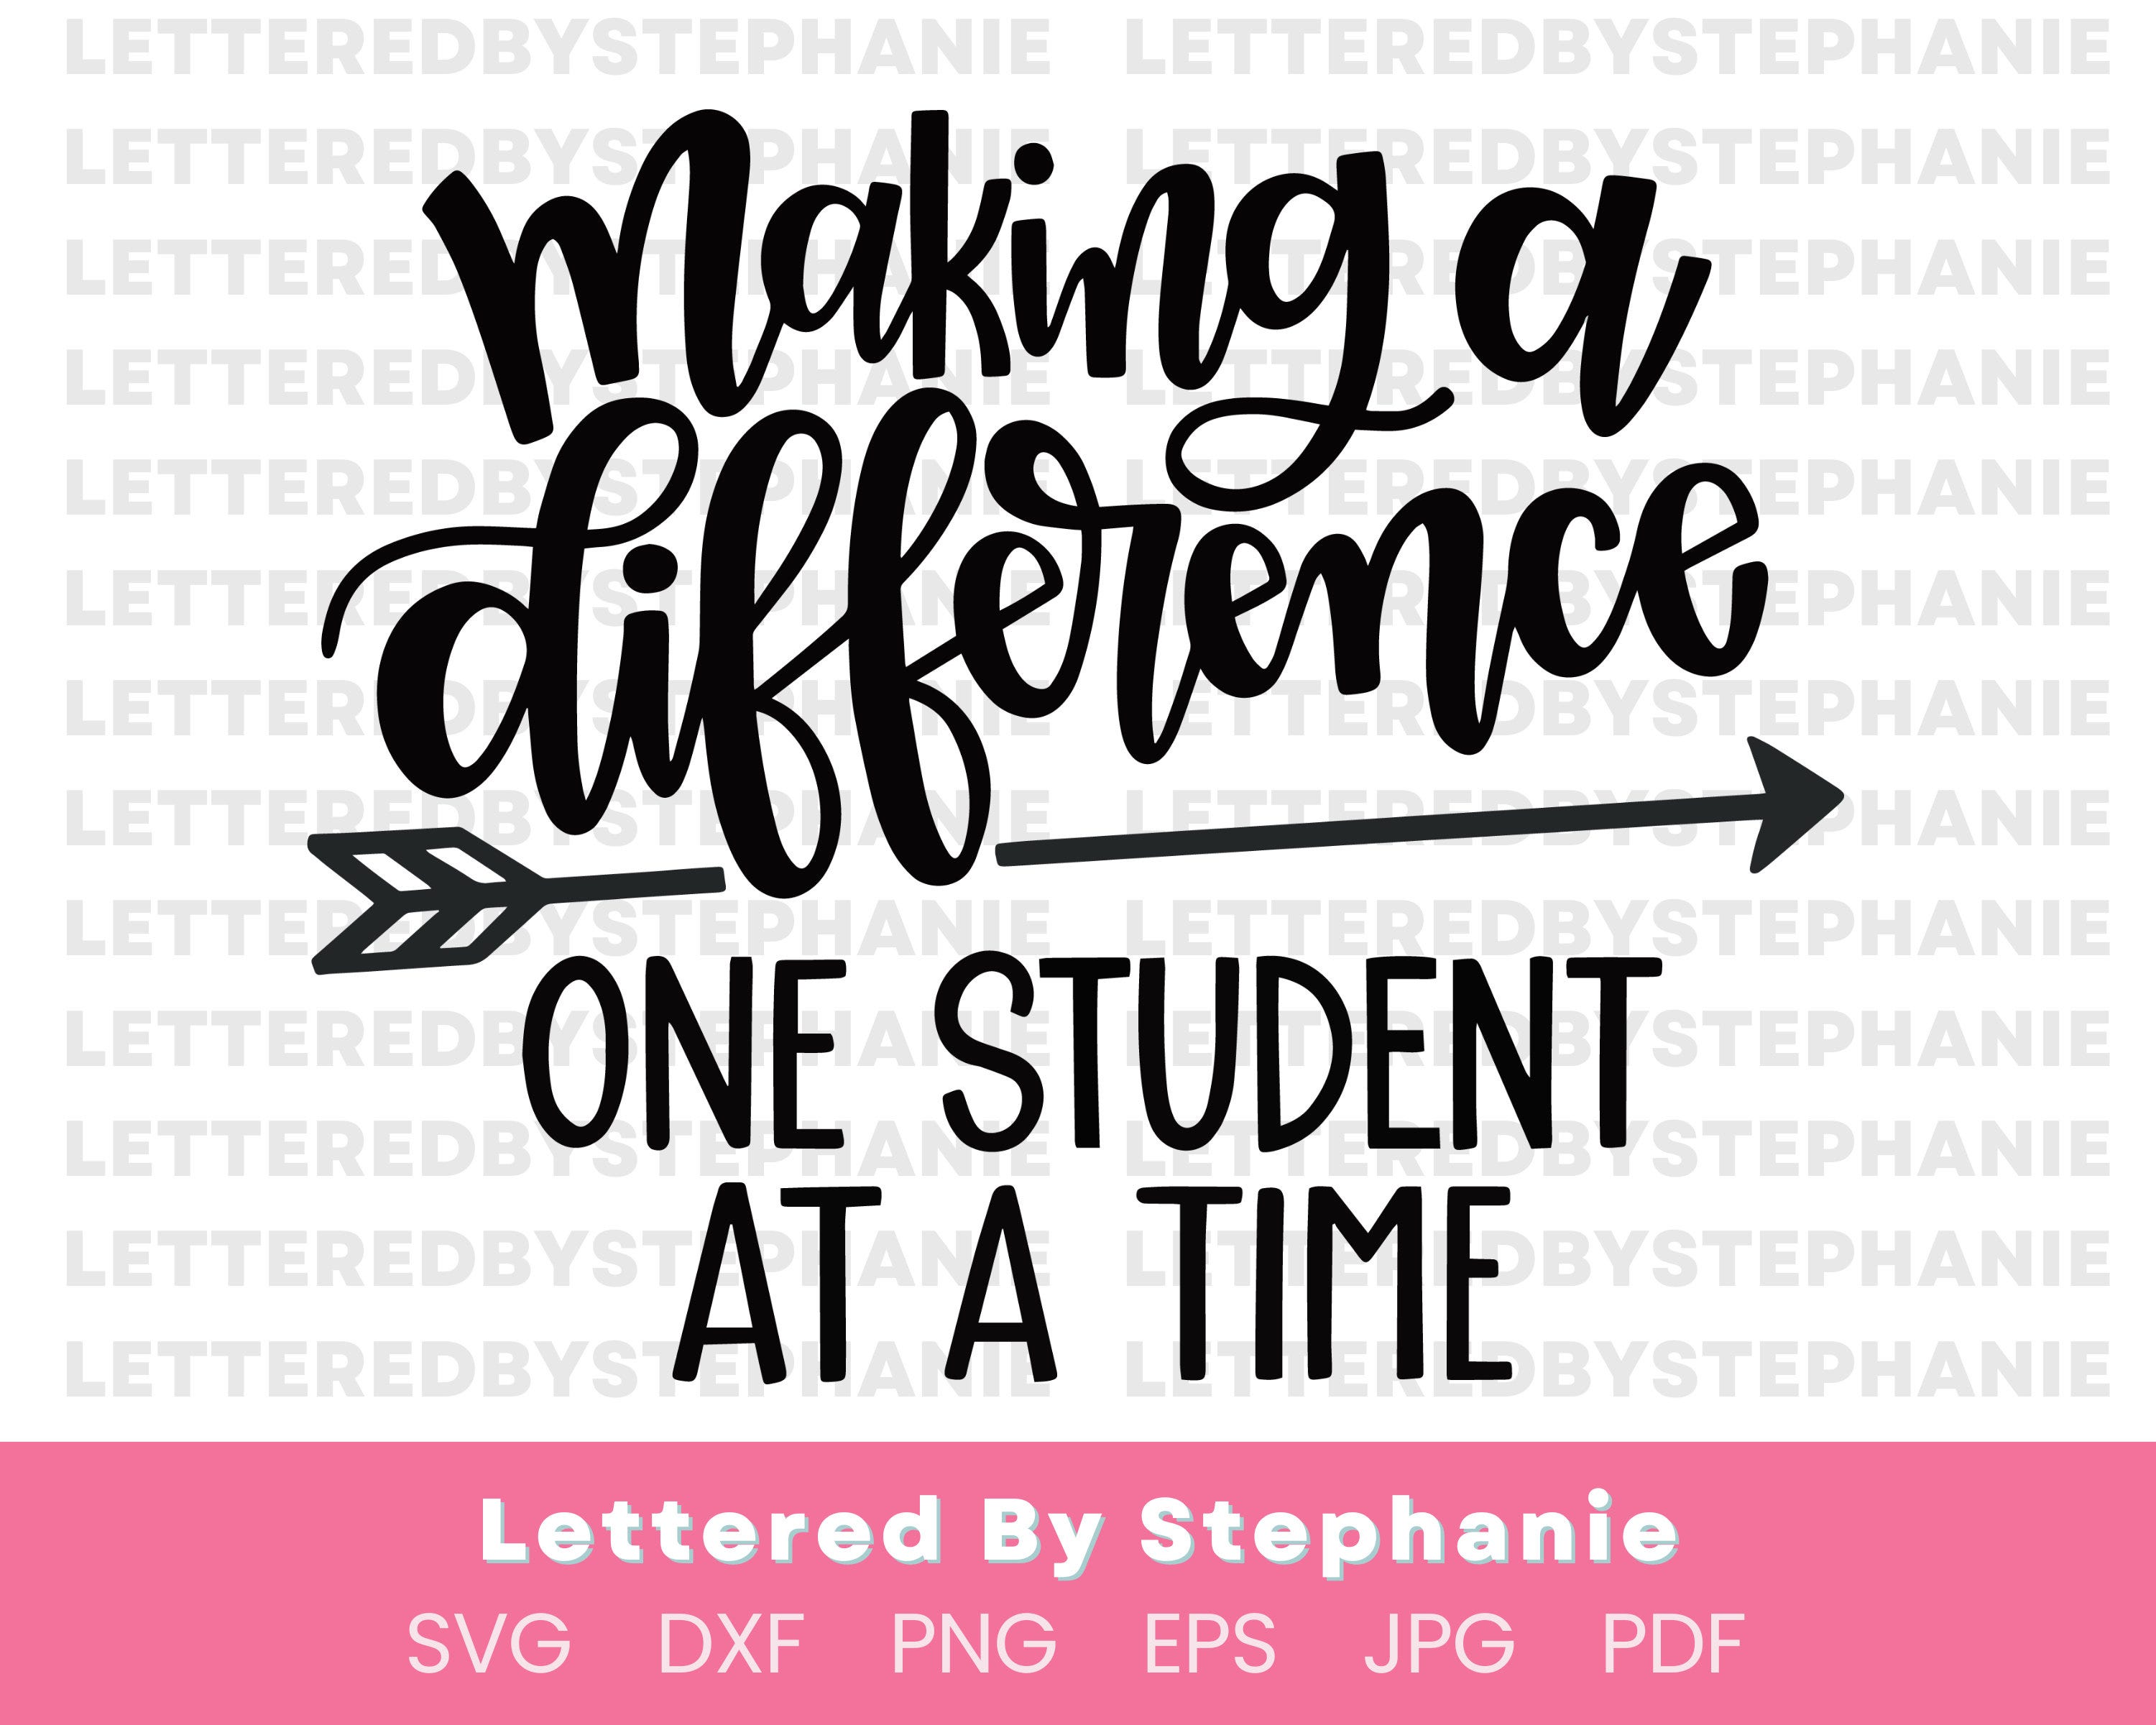 Making a difference one student at a time SVG Cut File, inspiring teacher quote svg, teacher gift svg, back to school svg, cricut cut file